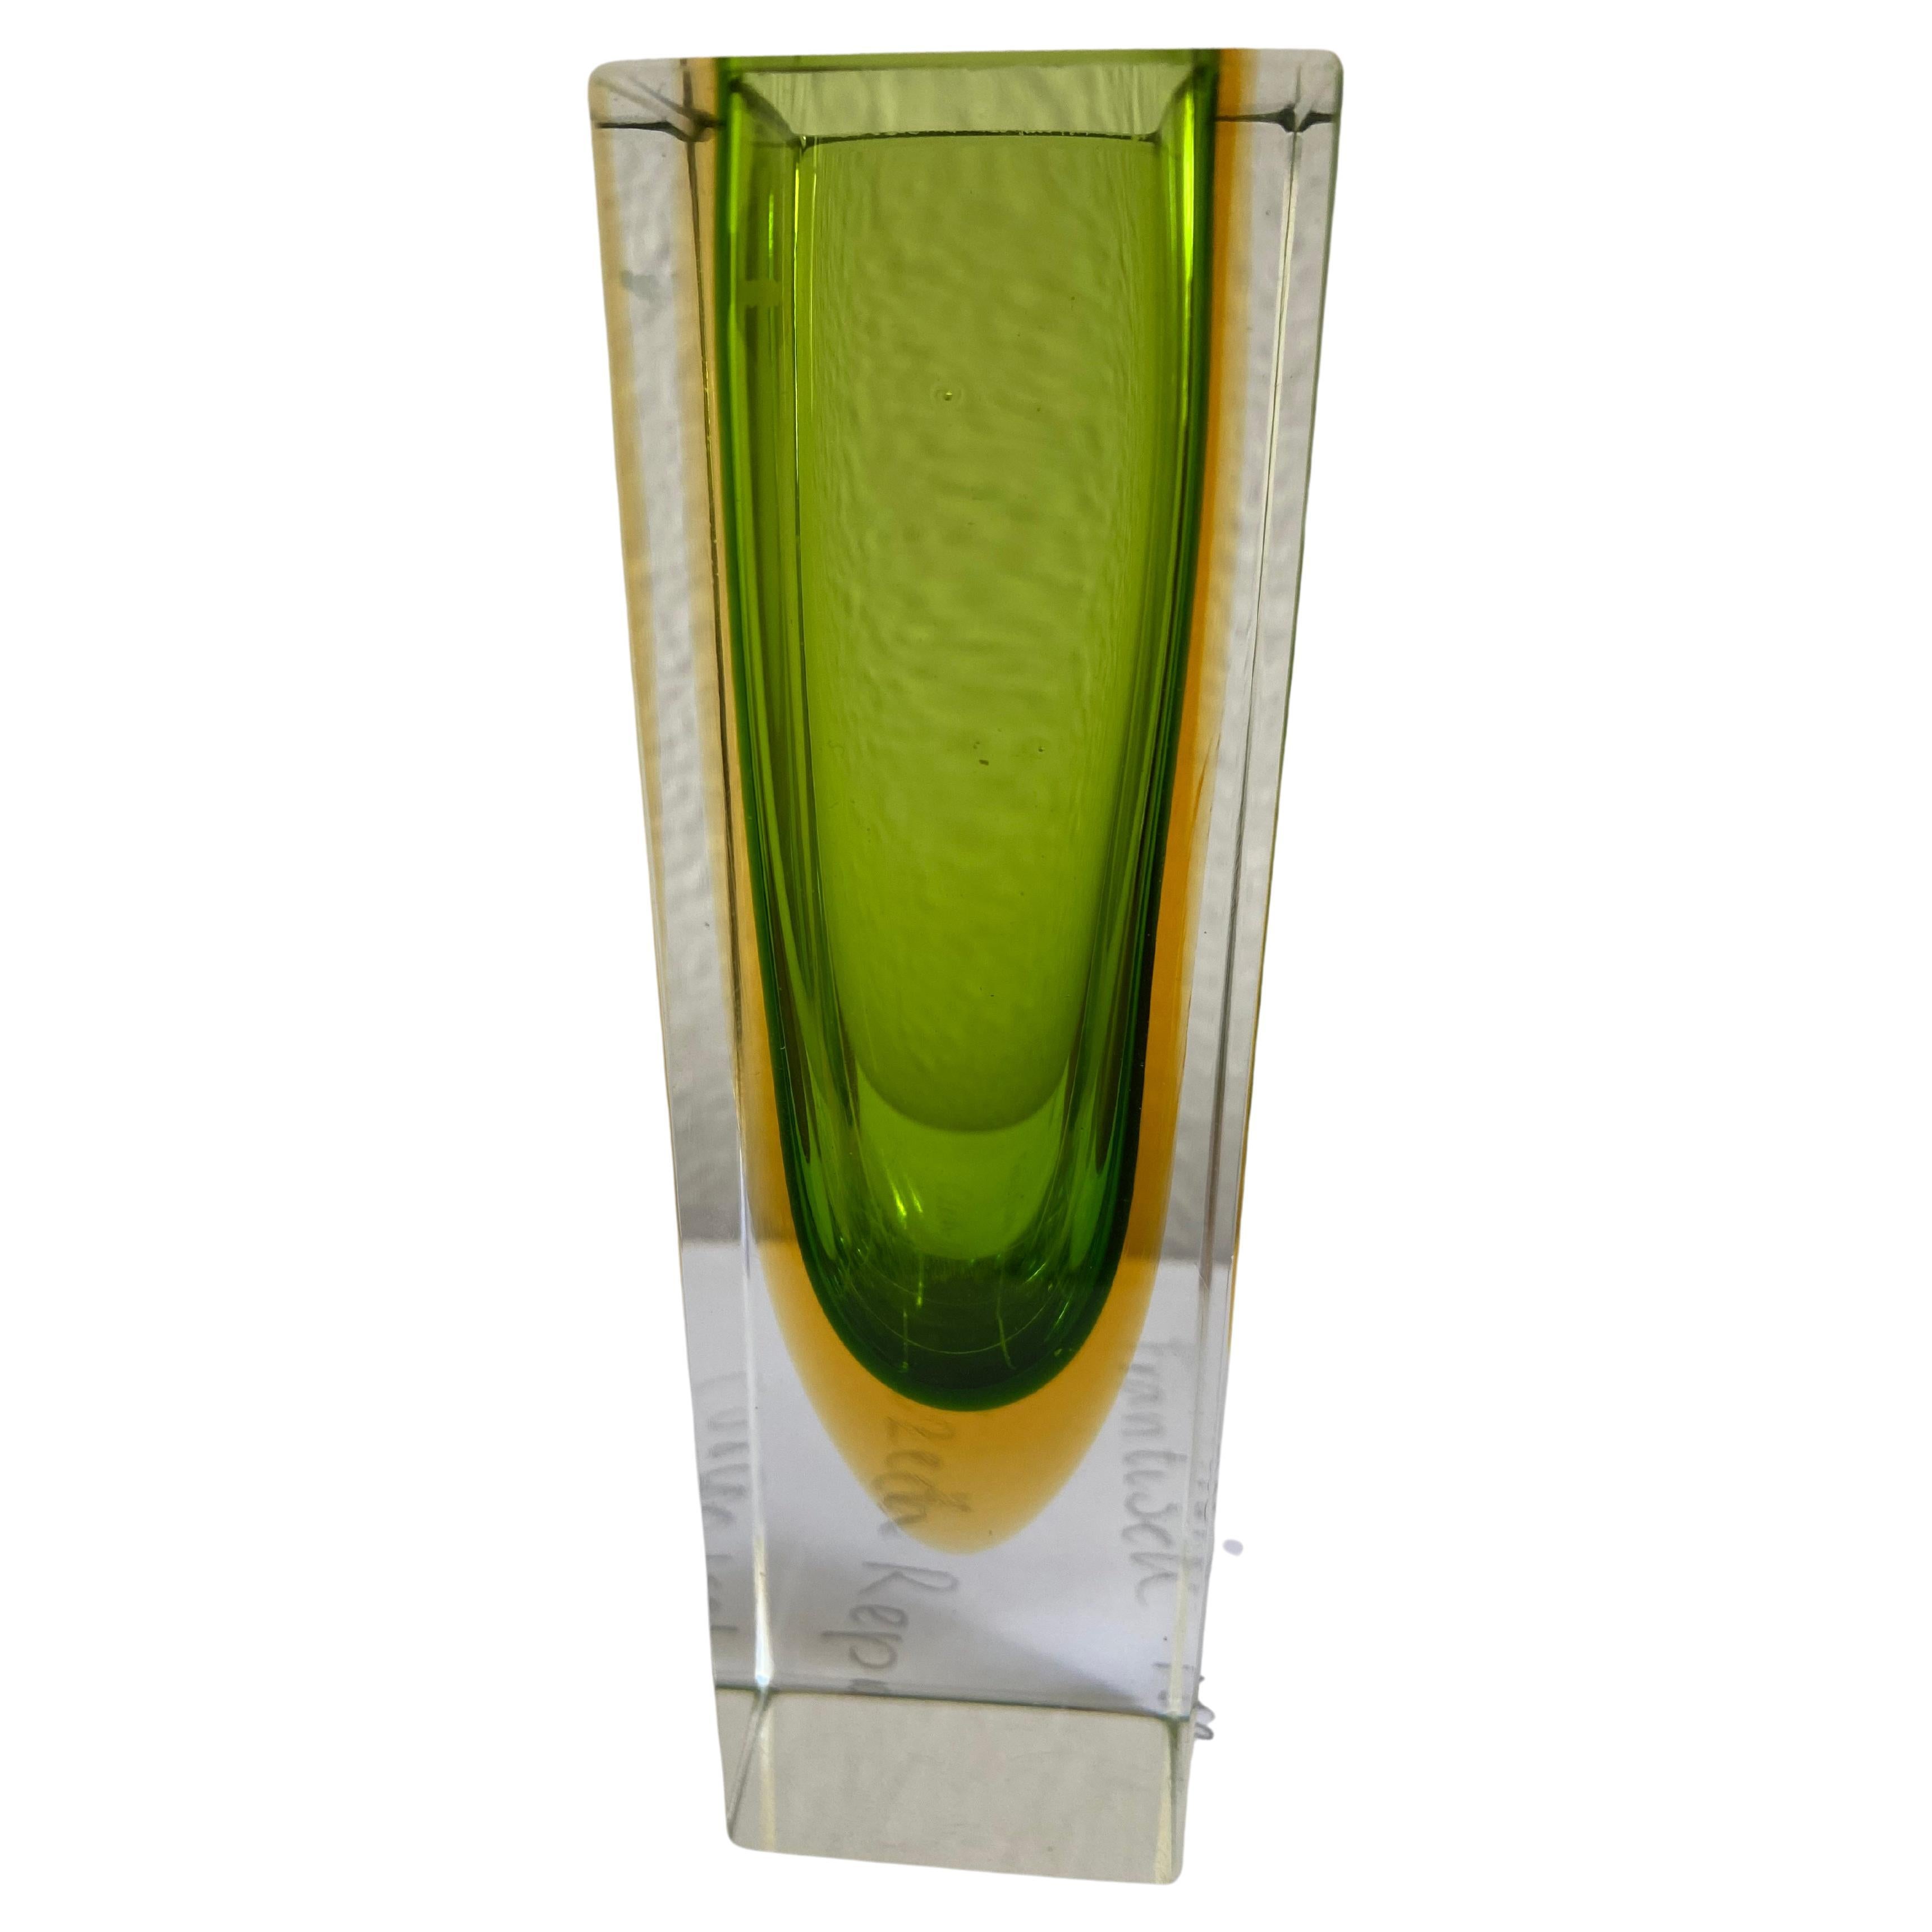 Beautiful green and yellowwi Mid-Century Modern Italian Murano glass vase. Made using the Sommerso (submerged) glass technique.